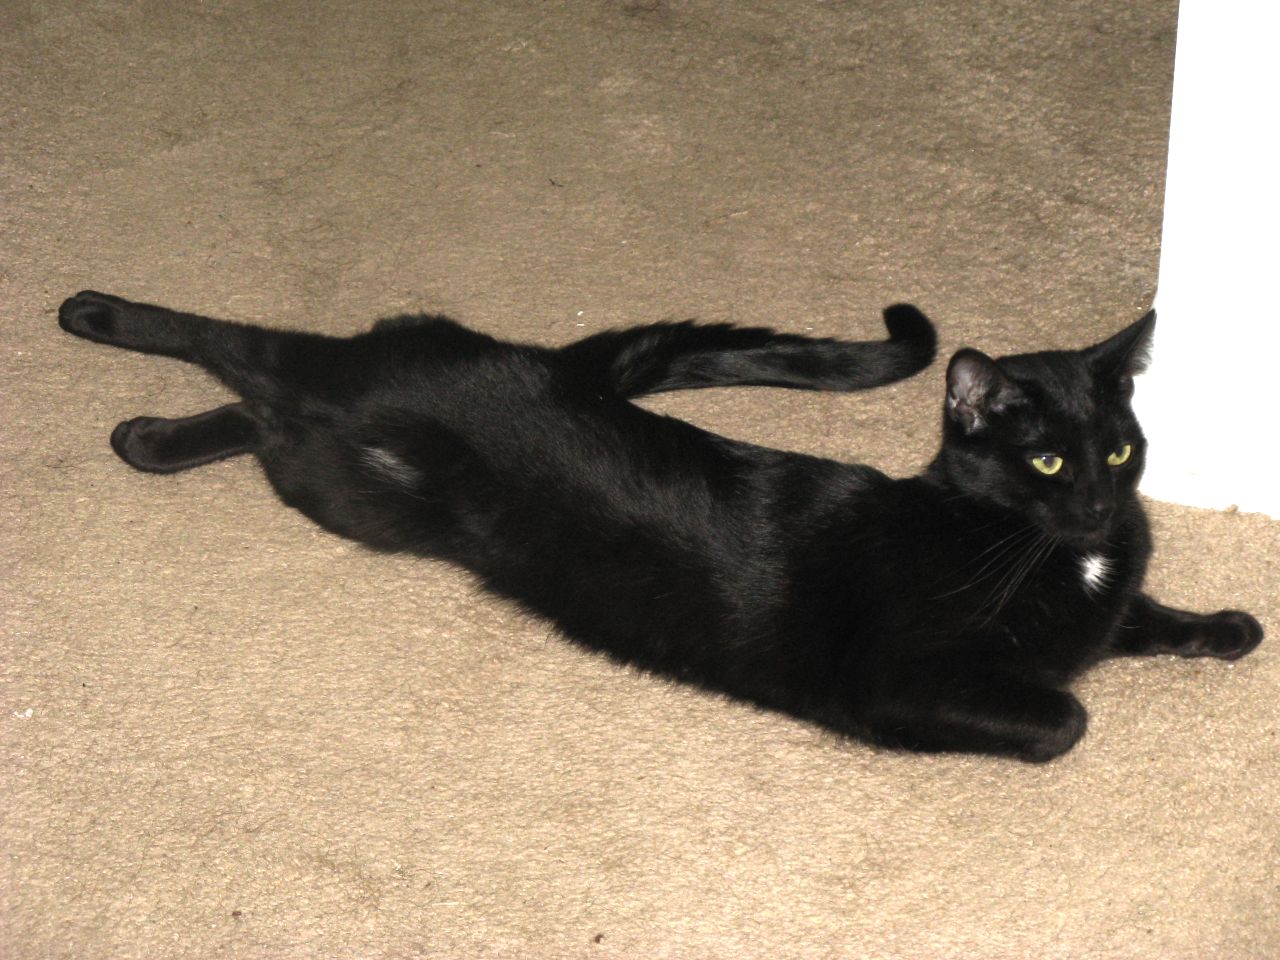 a black cat with yellow eyes lies on the carpet next to the corner